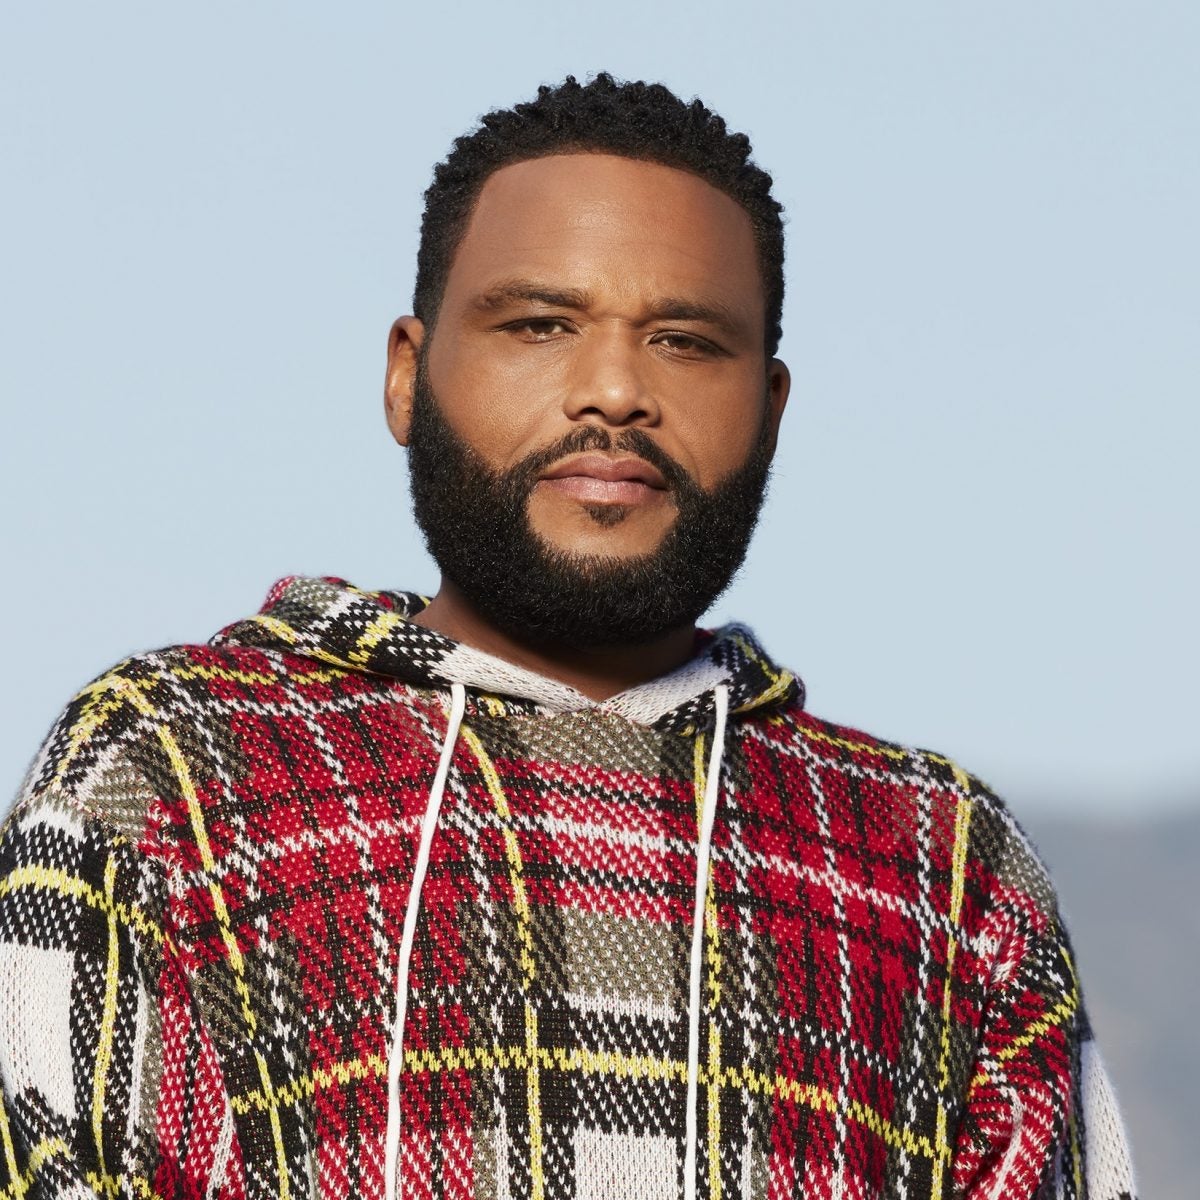 Anthony Anderson, Jamie Foxx, Yvette Nicole Brown And More Celebrate Disney Dreamers 2020 Class